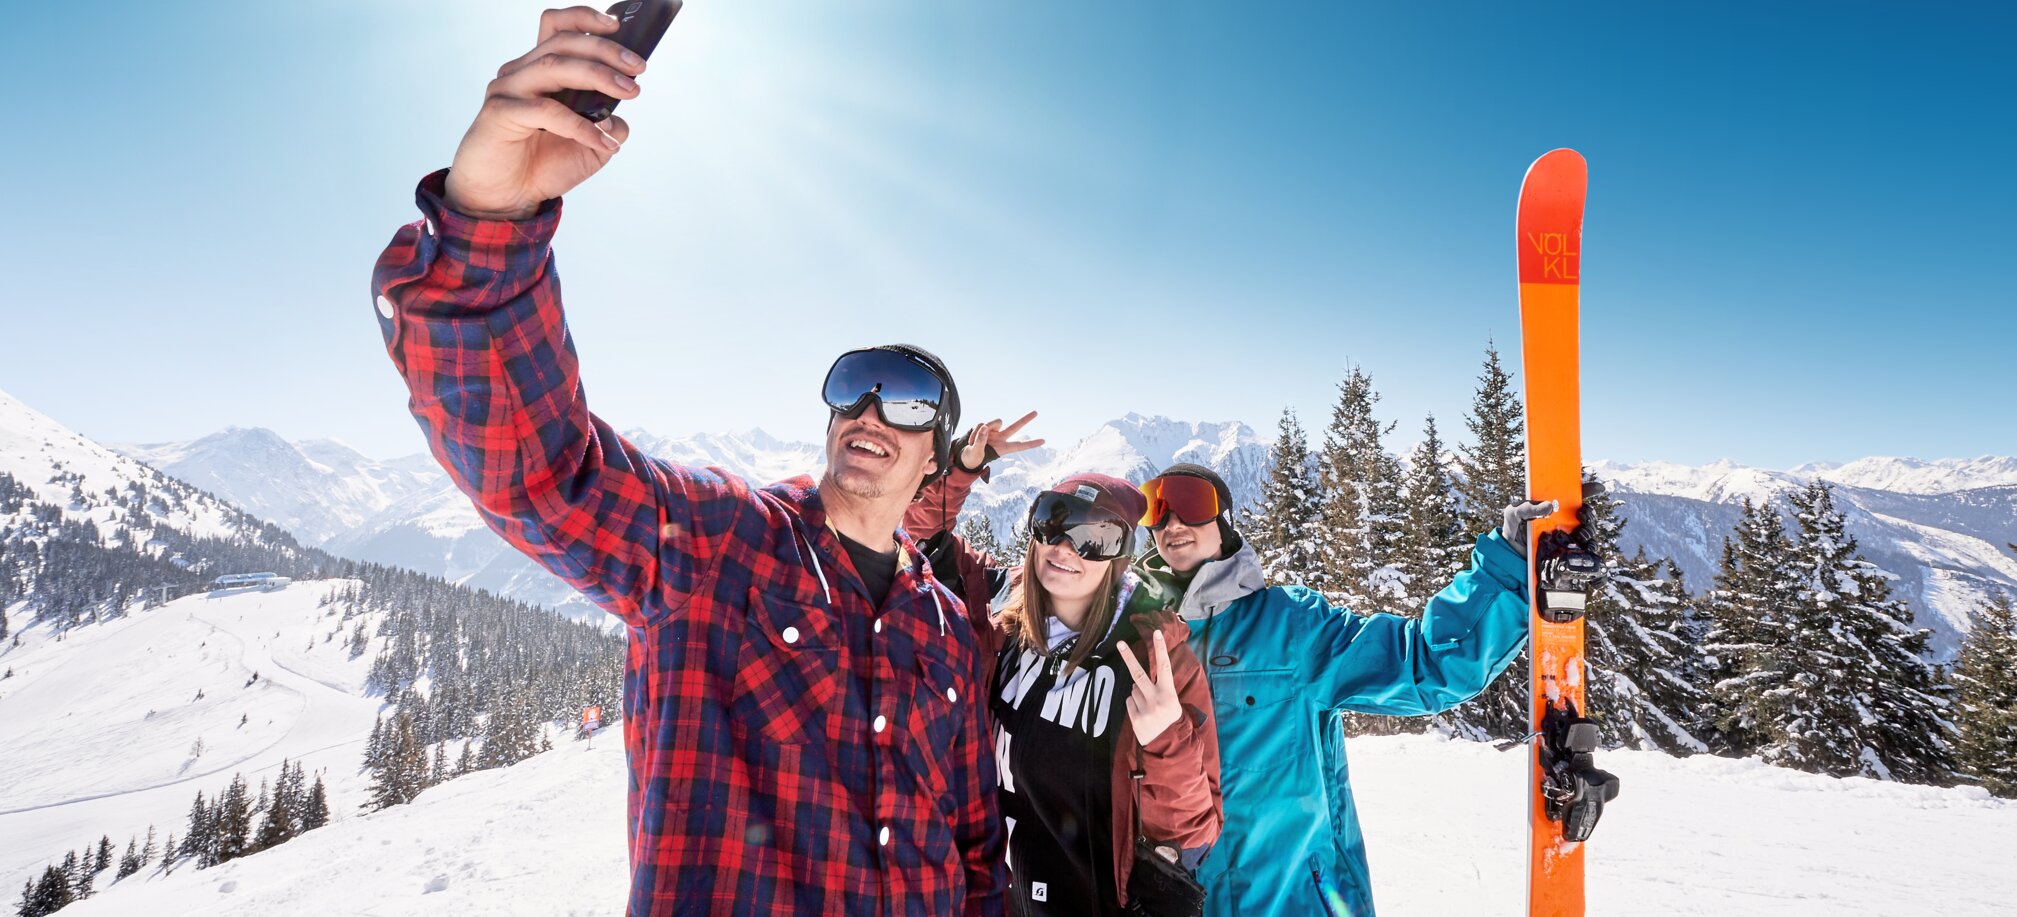 Three teenagers in ski goggles take a selfie on the snow-covered mountain and the one in the back holds an orange ski